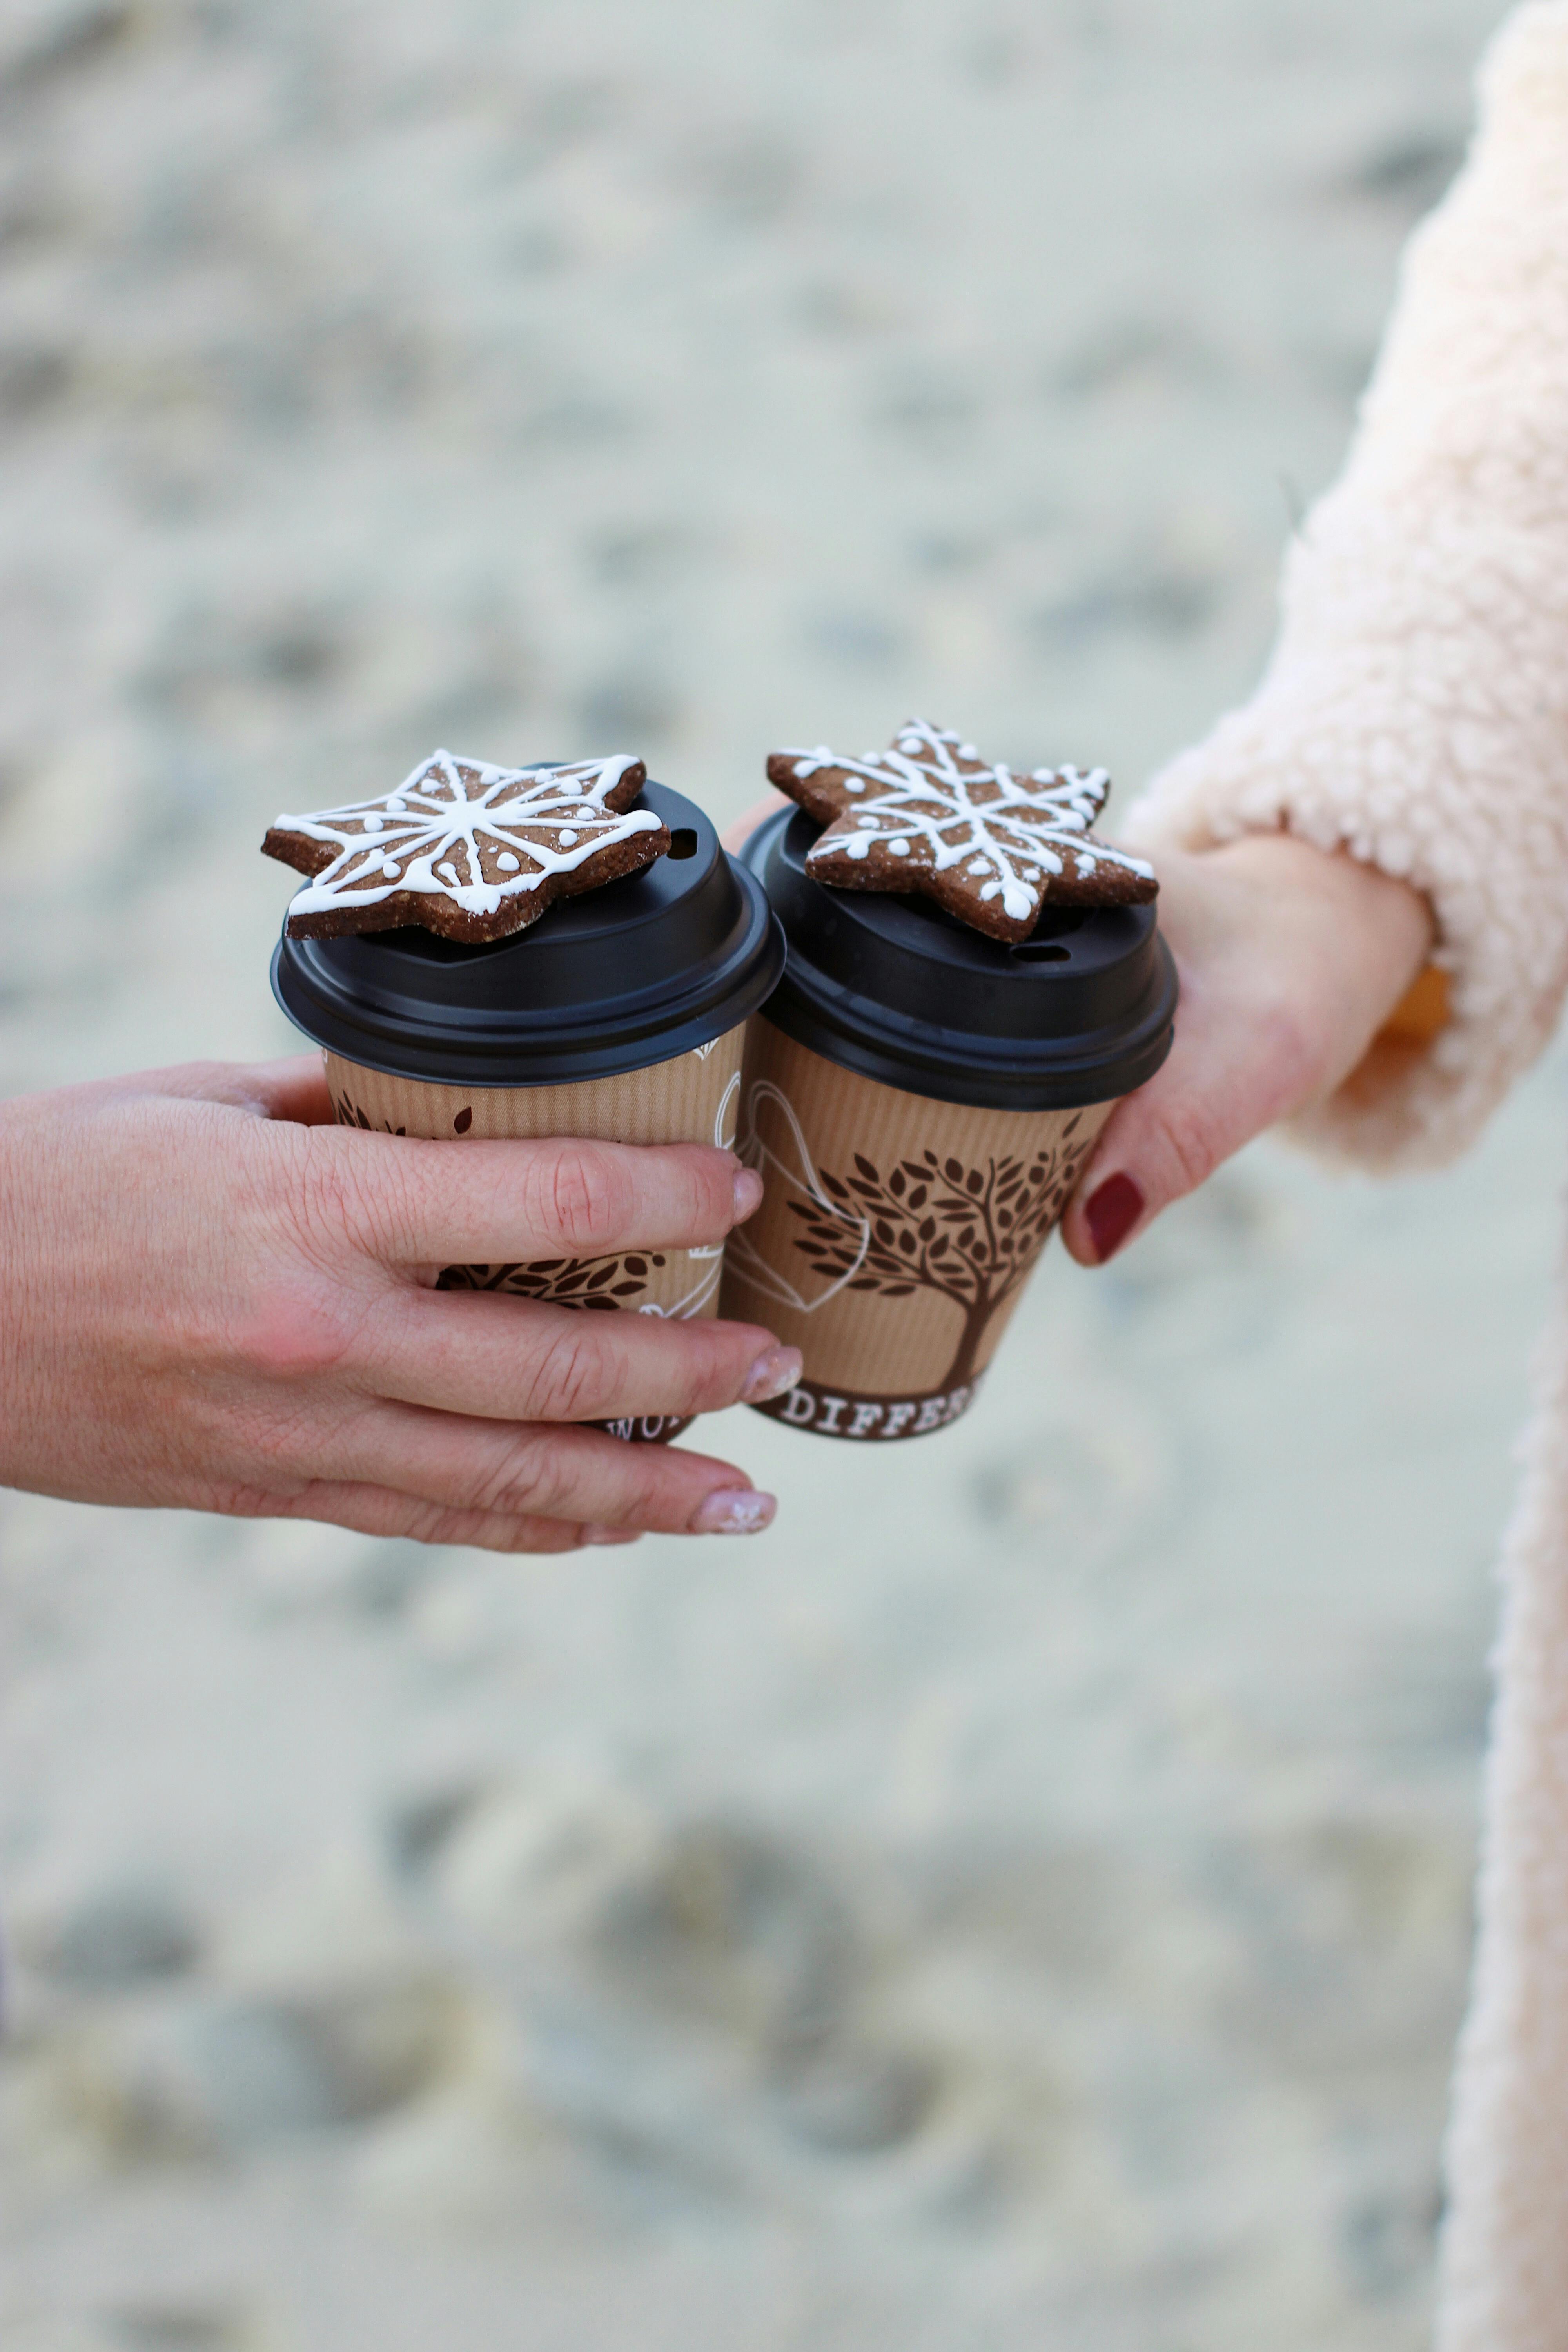 two coffee cups held in hands against white background